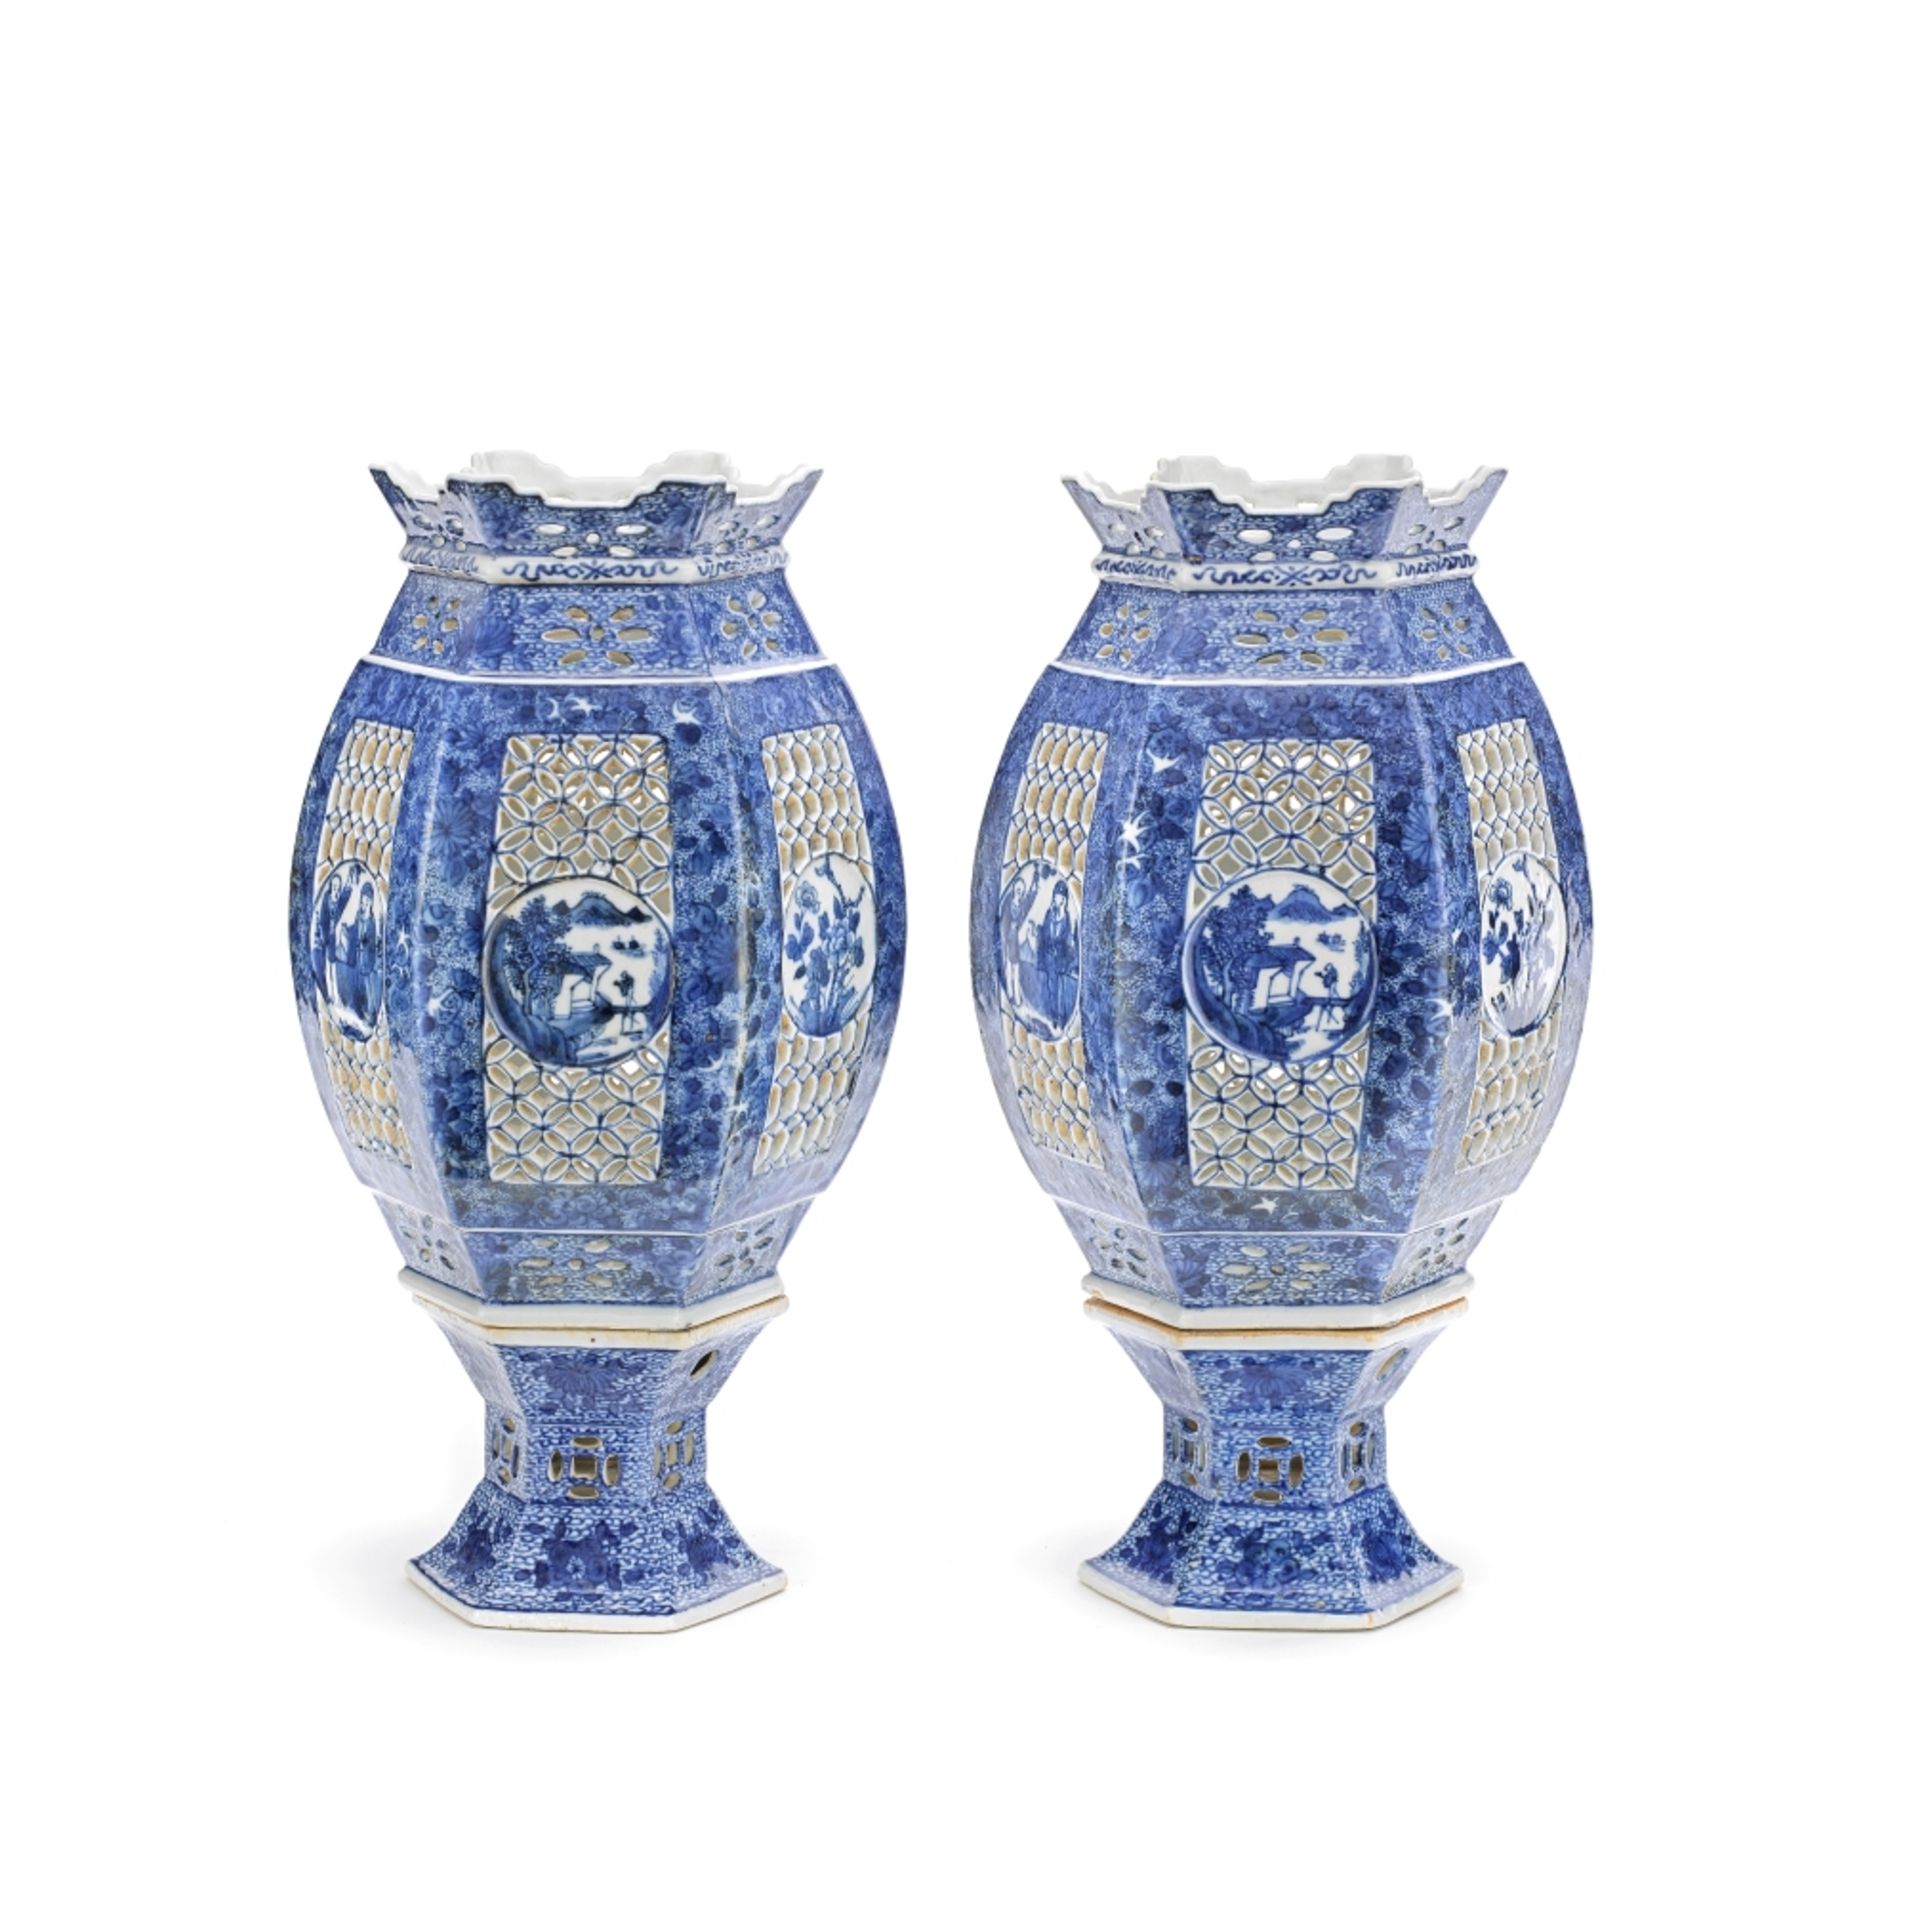 A PAIR OF BLUE AND WHITE LANTERN VASES 18th/19th century (4)